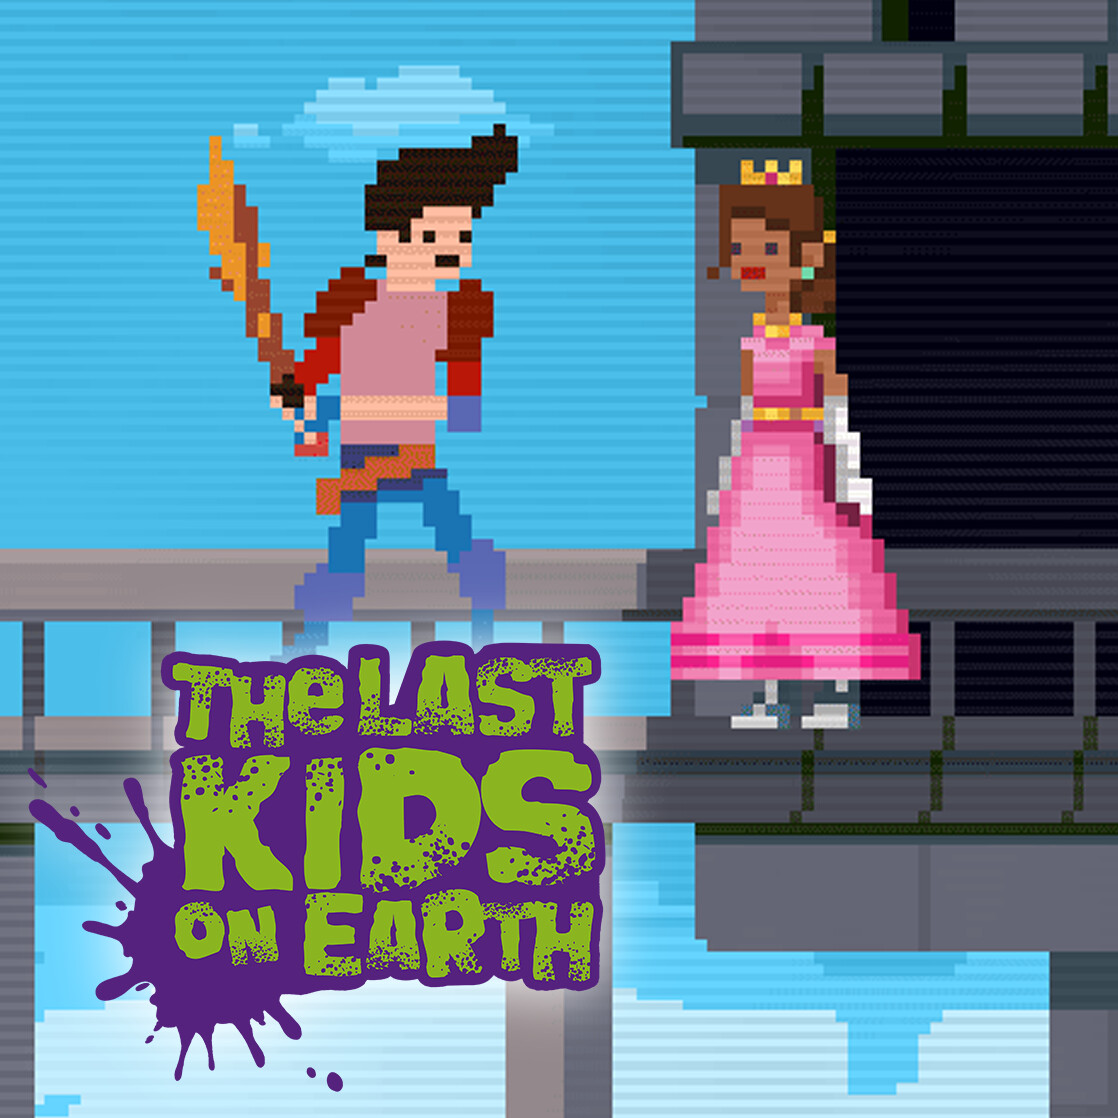 Last Kids on Earth - Animated Pixel Art Sequence